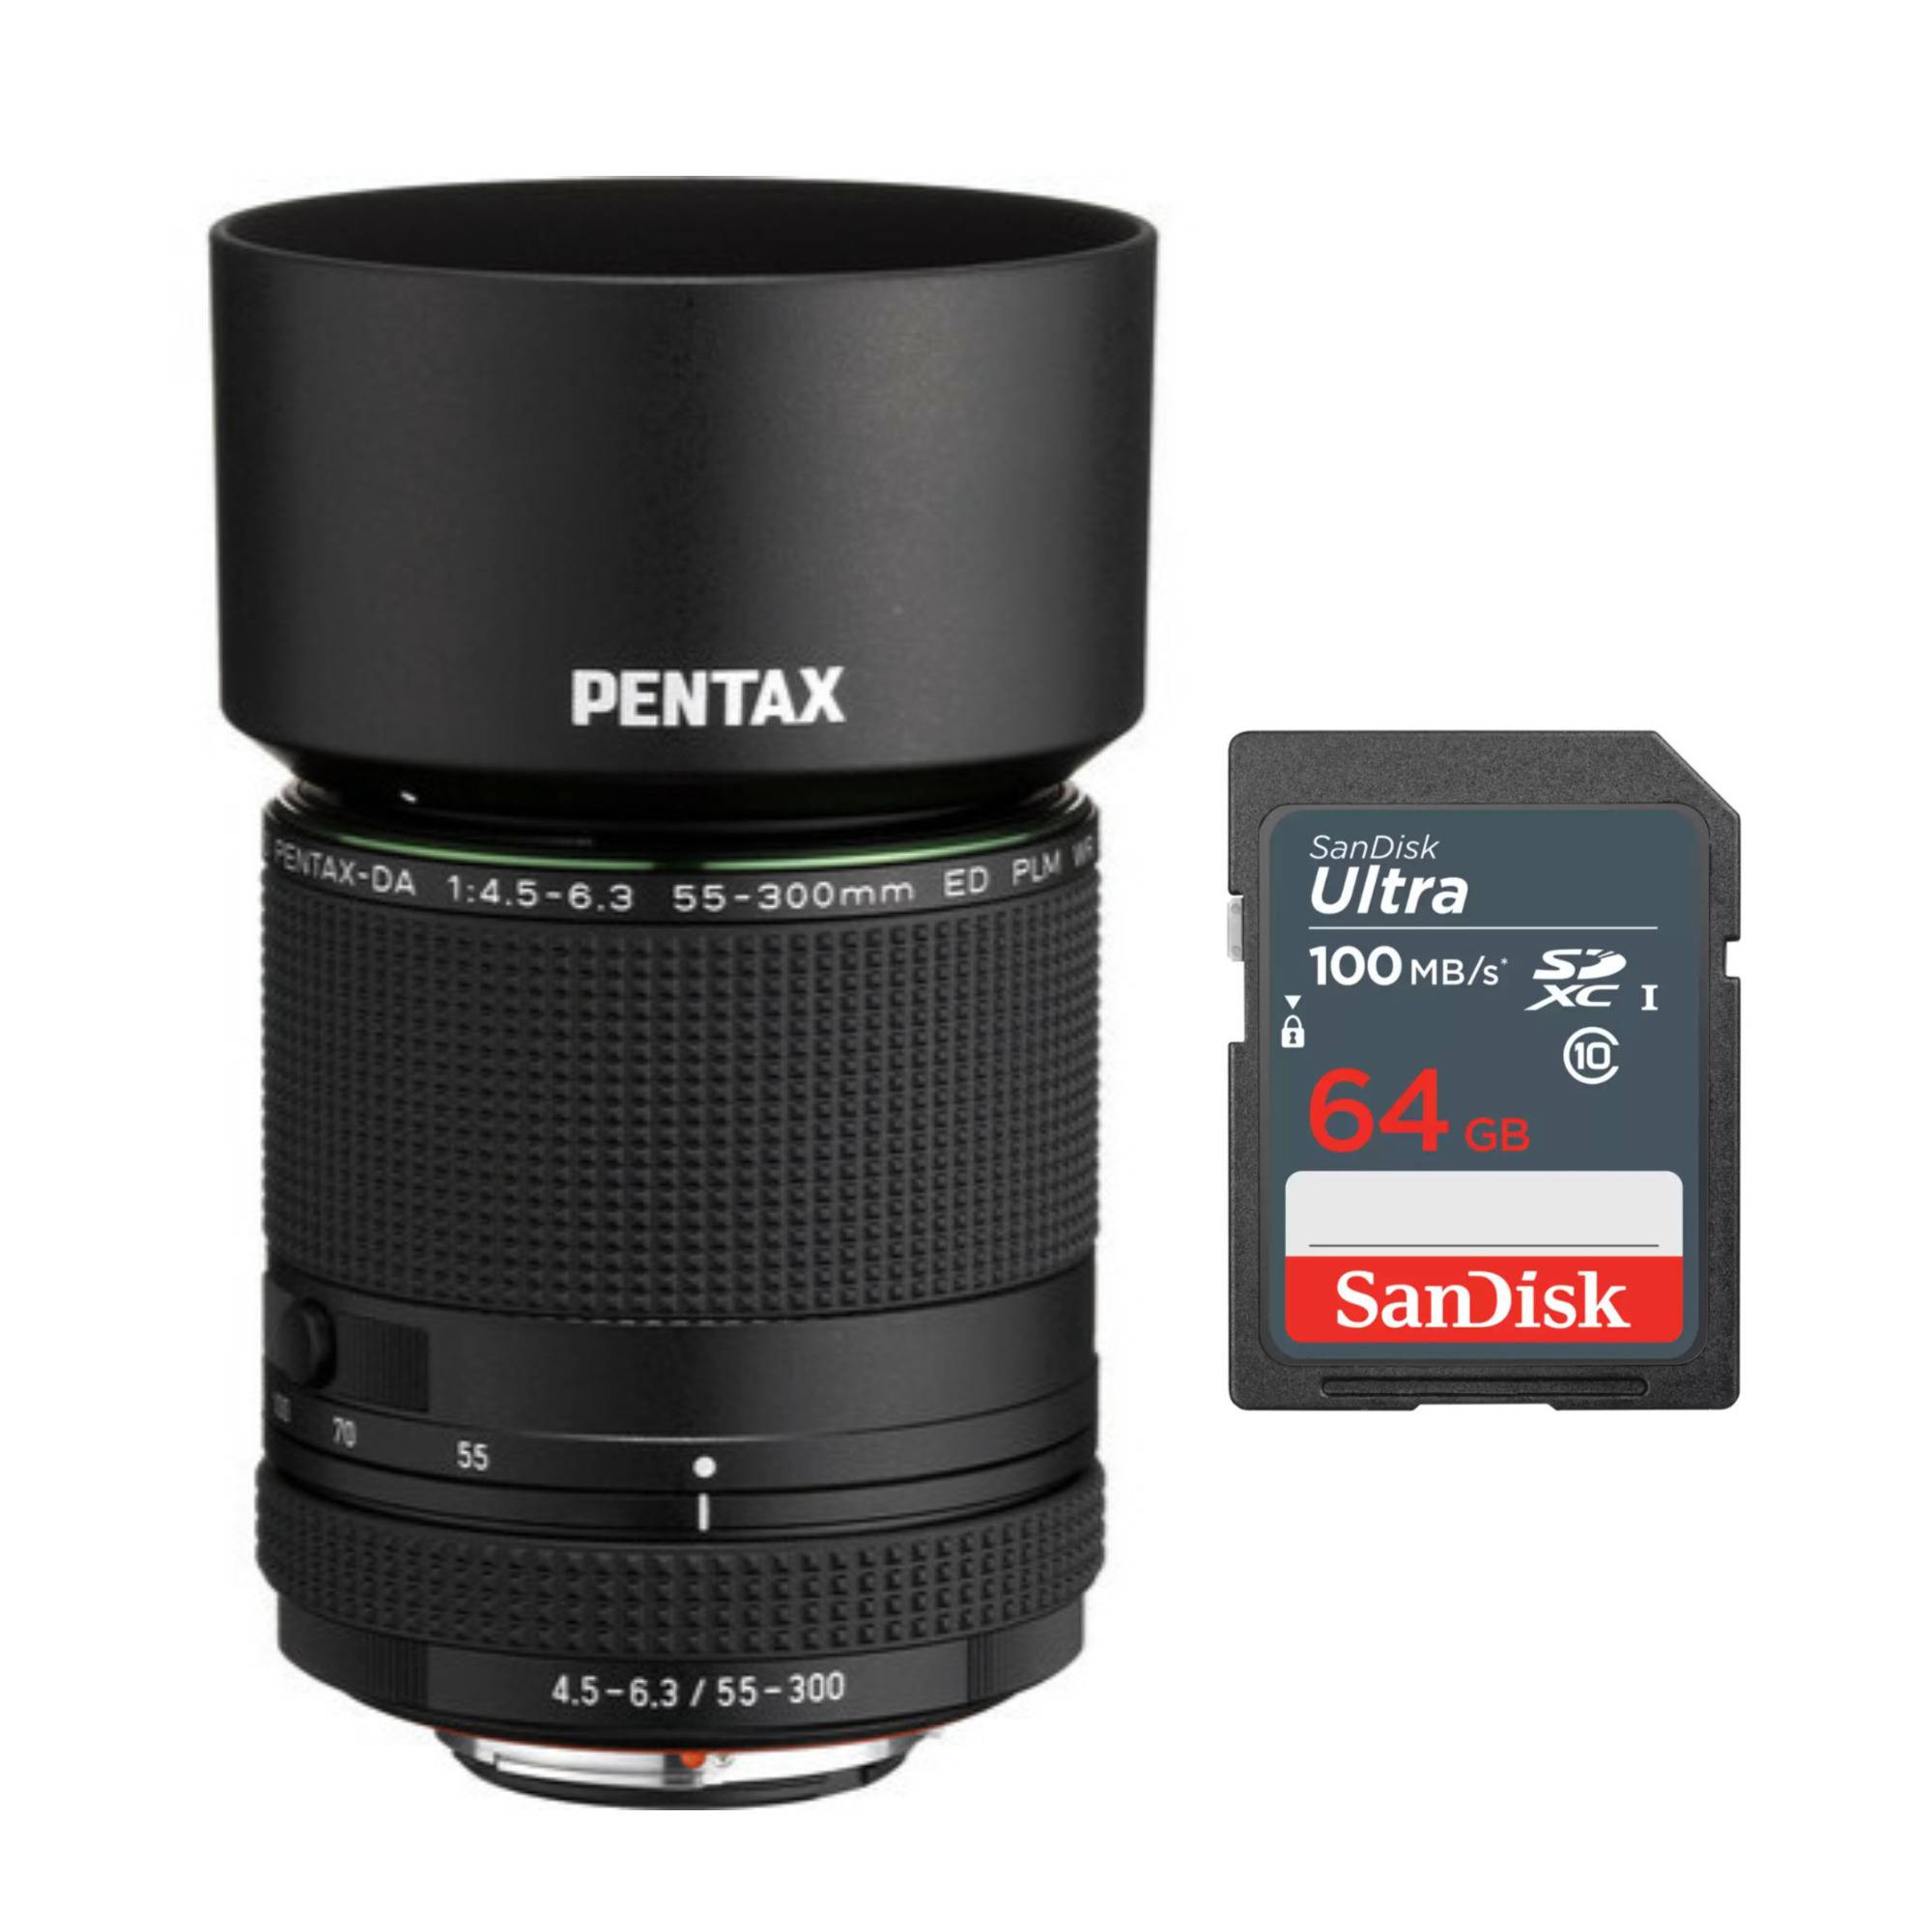 Pentax HD PENTAX-DA 55-300mm f/4.5-6.3 ED PLM WR RE Lens with 64 GB Memory Card and Accessory Kit